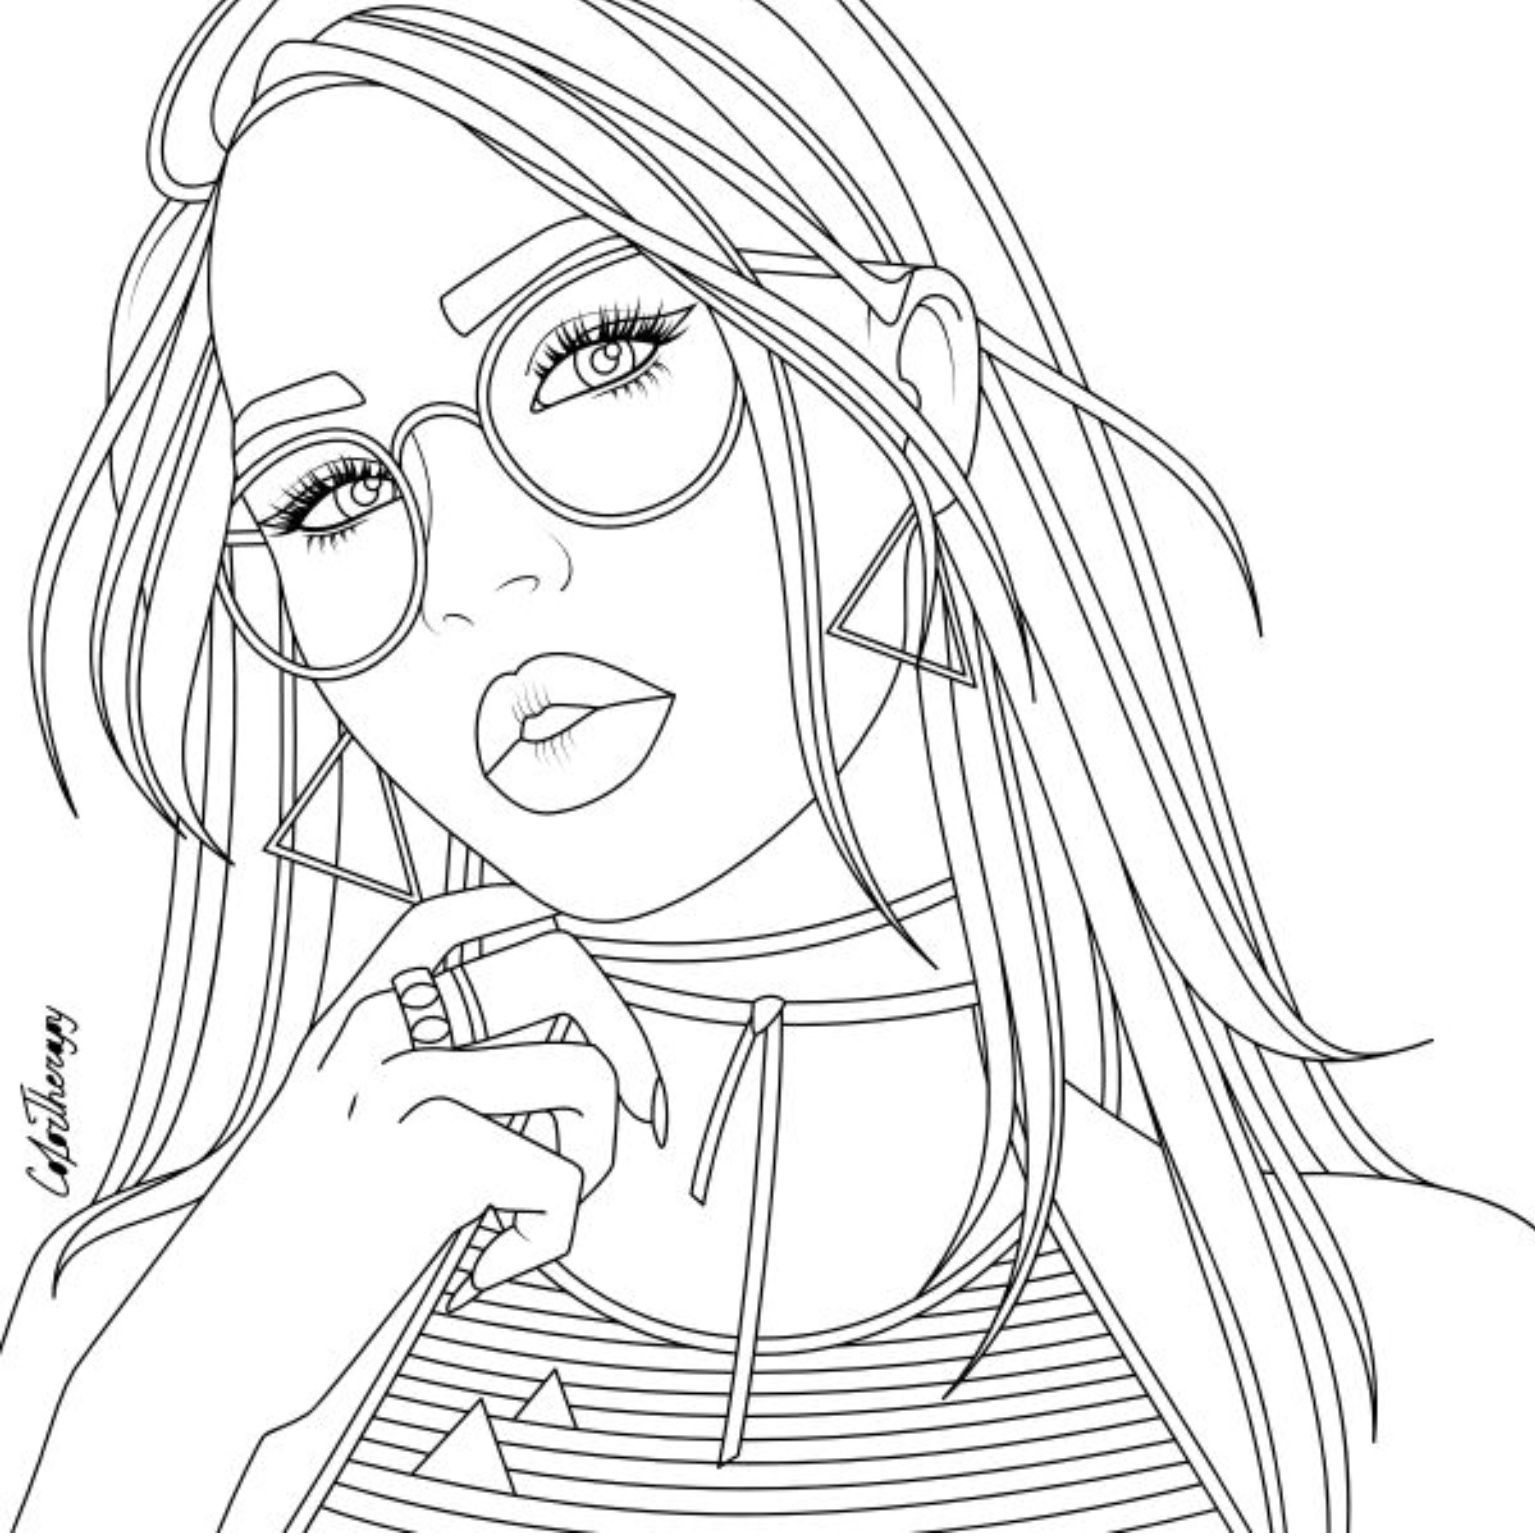 Animexlife people coloring pages cute coloring pages coloring pictures